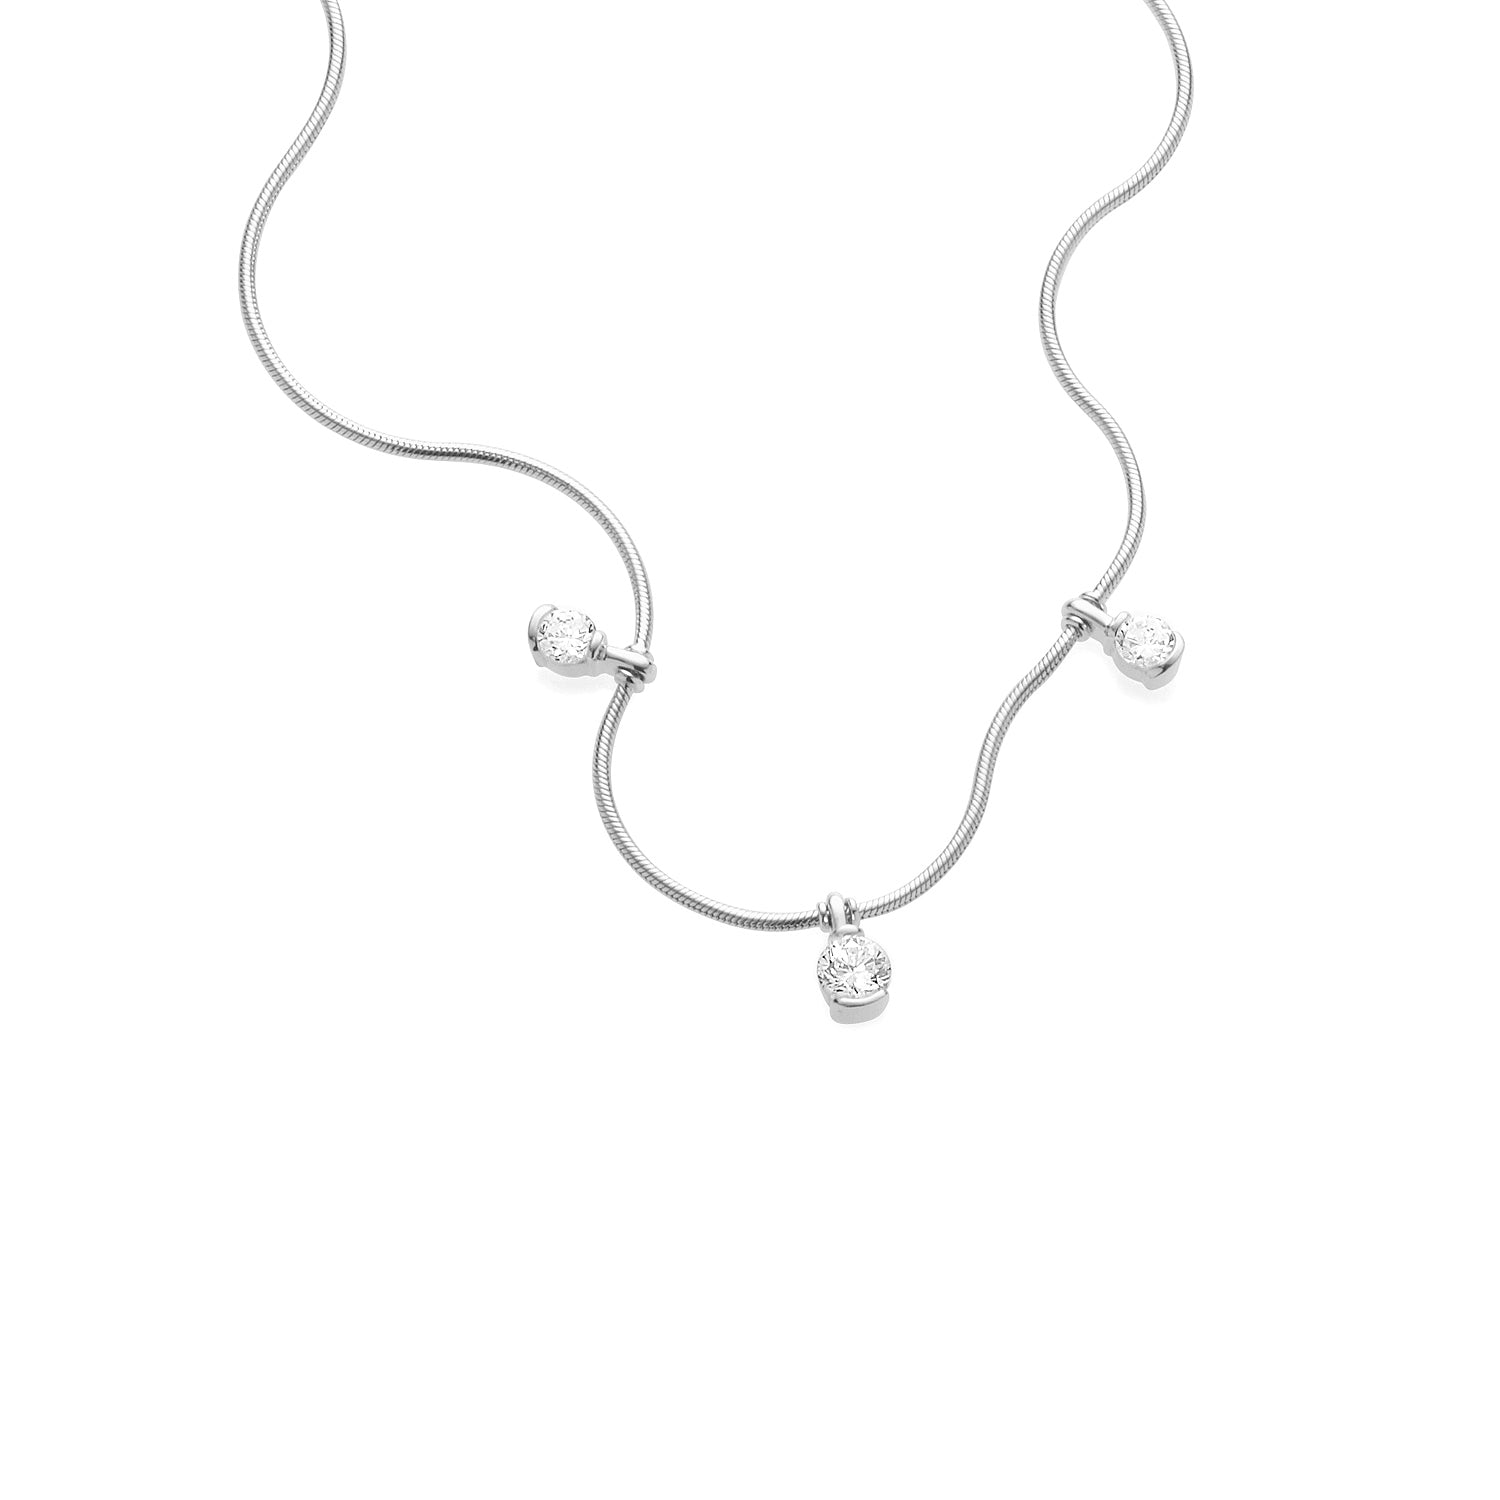 Silver Chain Necklace, Floating Ball Pendant Necklace, Sterling Silver –  CroatianJewelryCraft